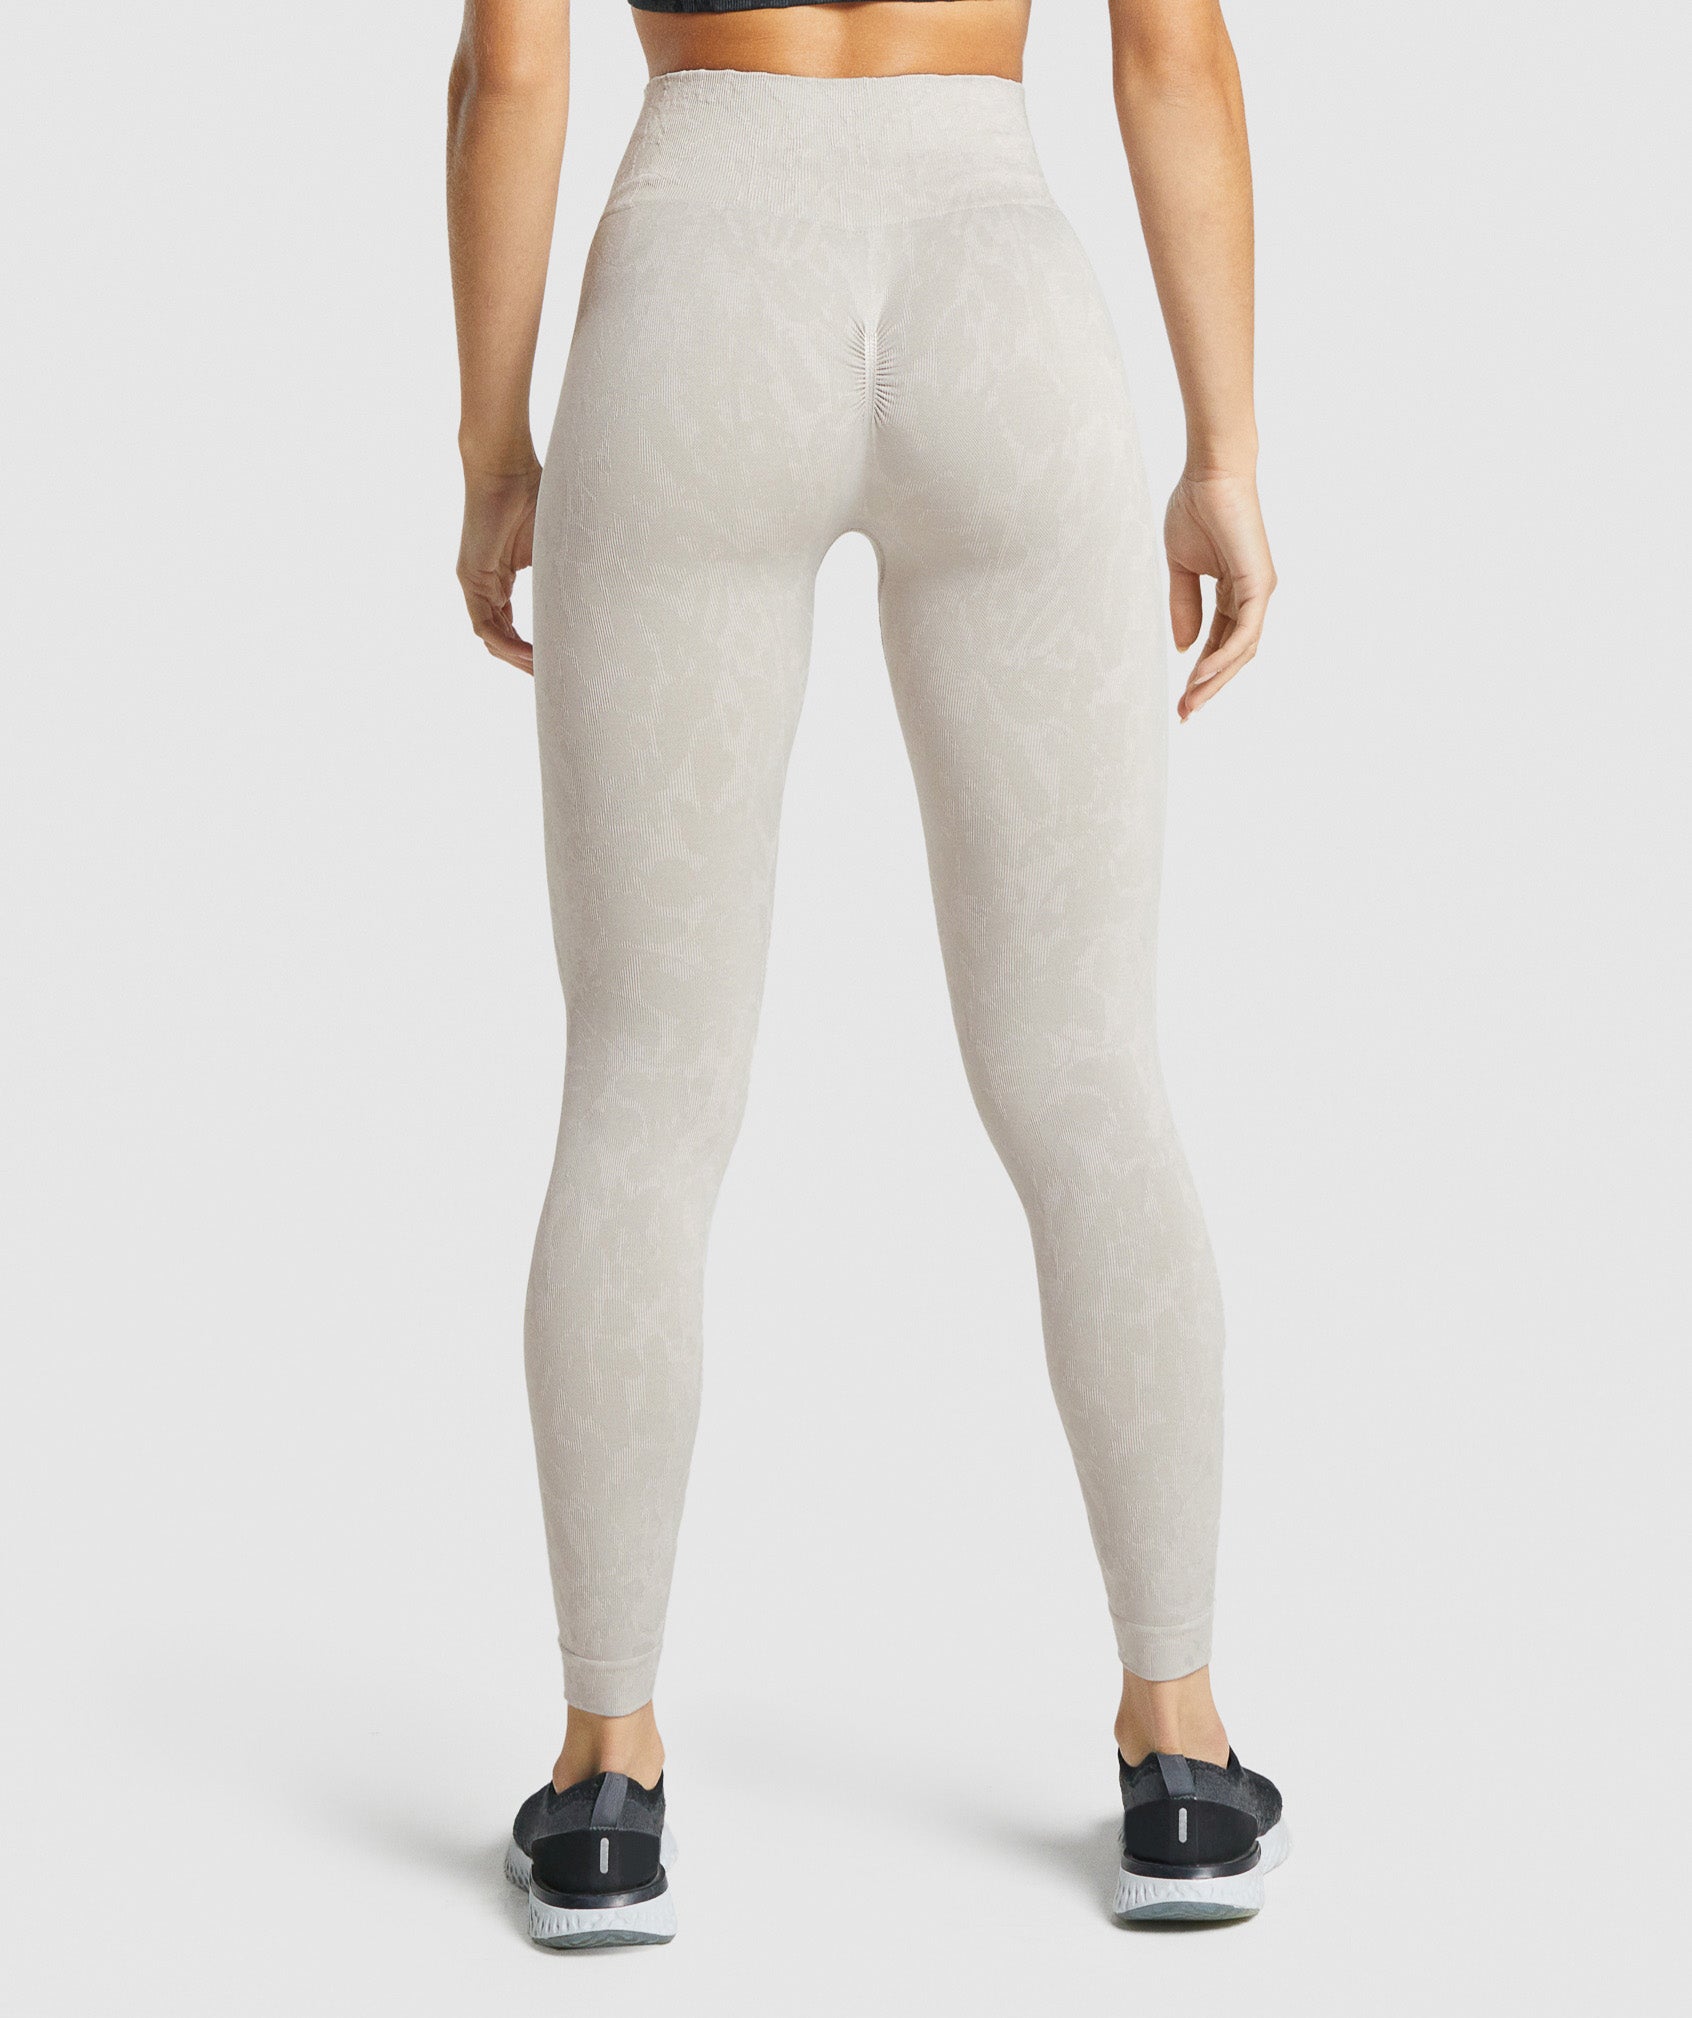 Adapt Animal Seamless Leggings in Butterfly | Grey - view 5